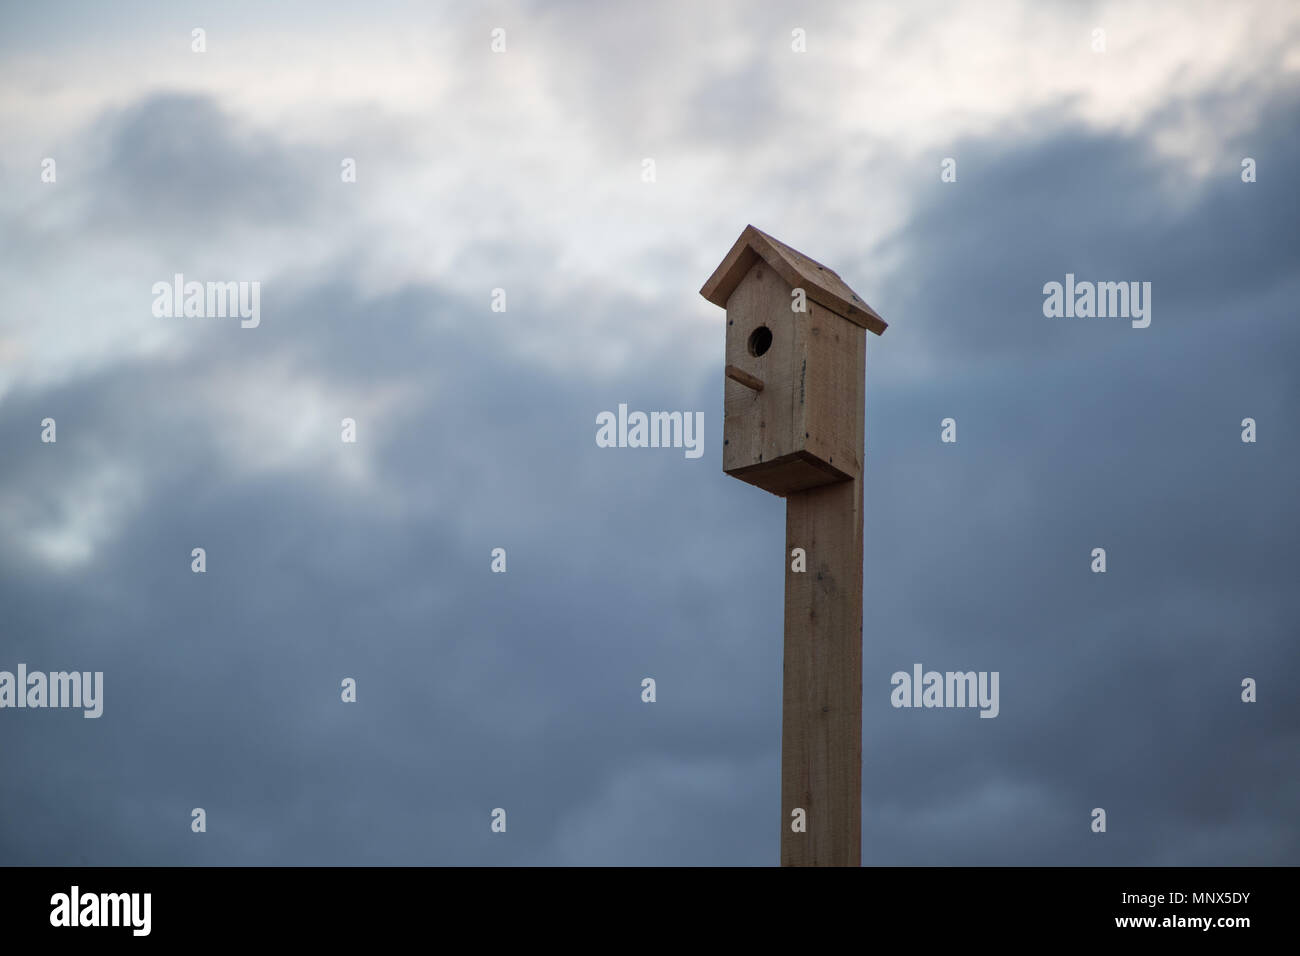 birdhouse nailed to a wooden pole against the sky Stock Photo